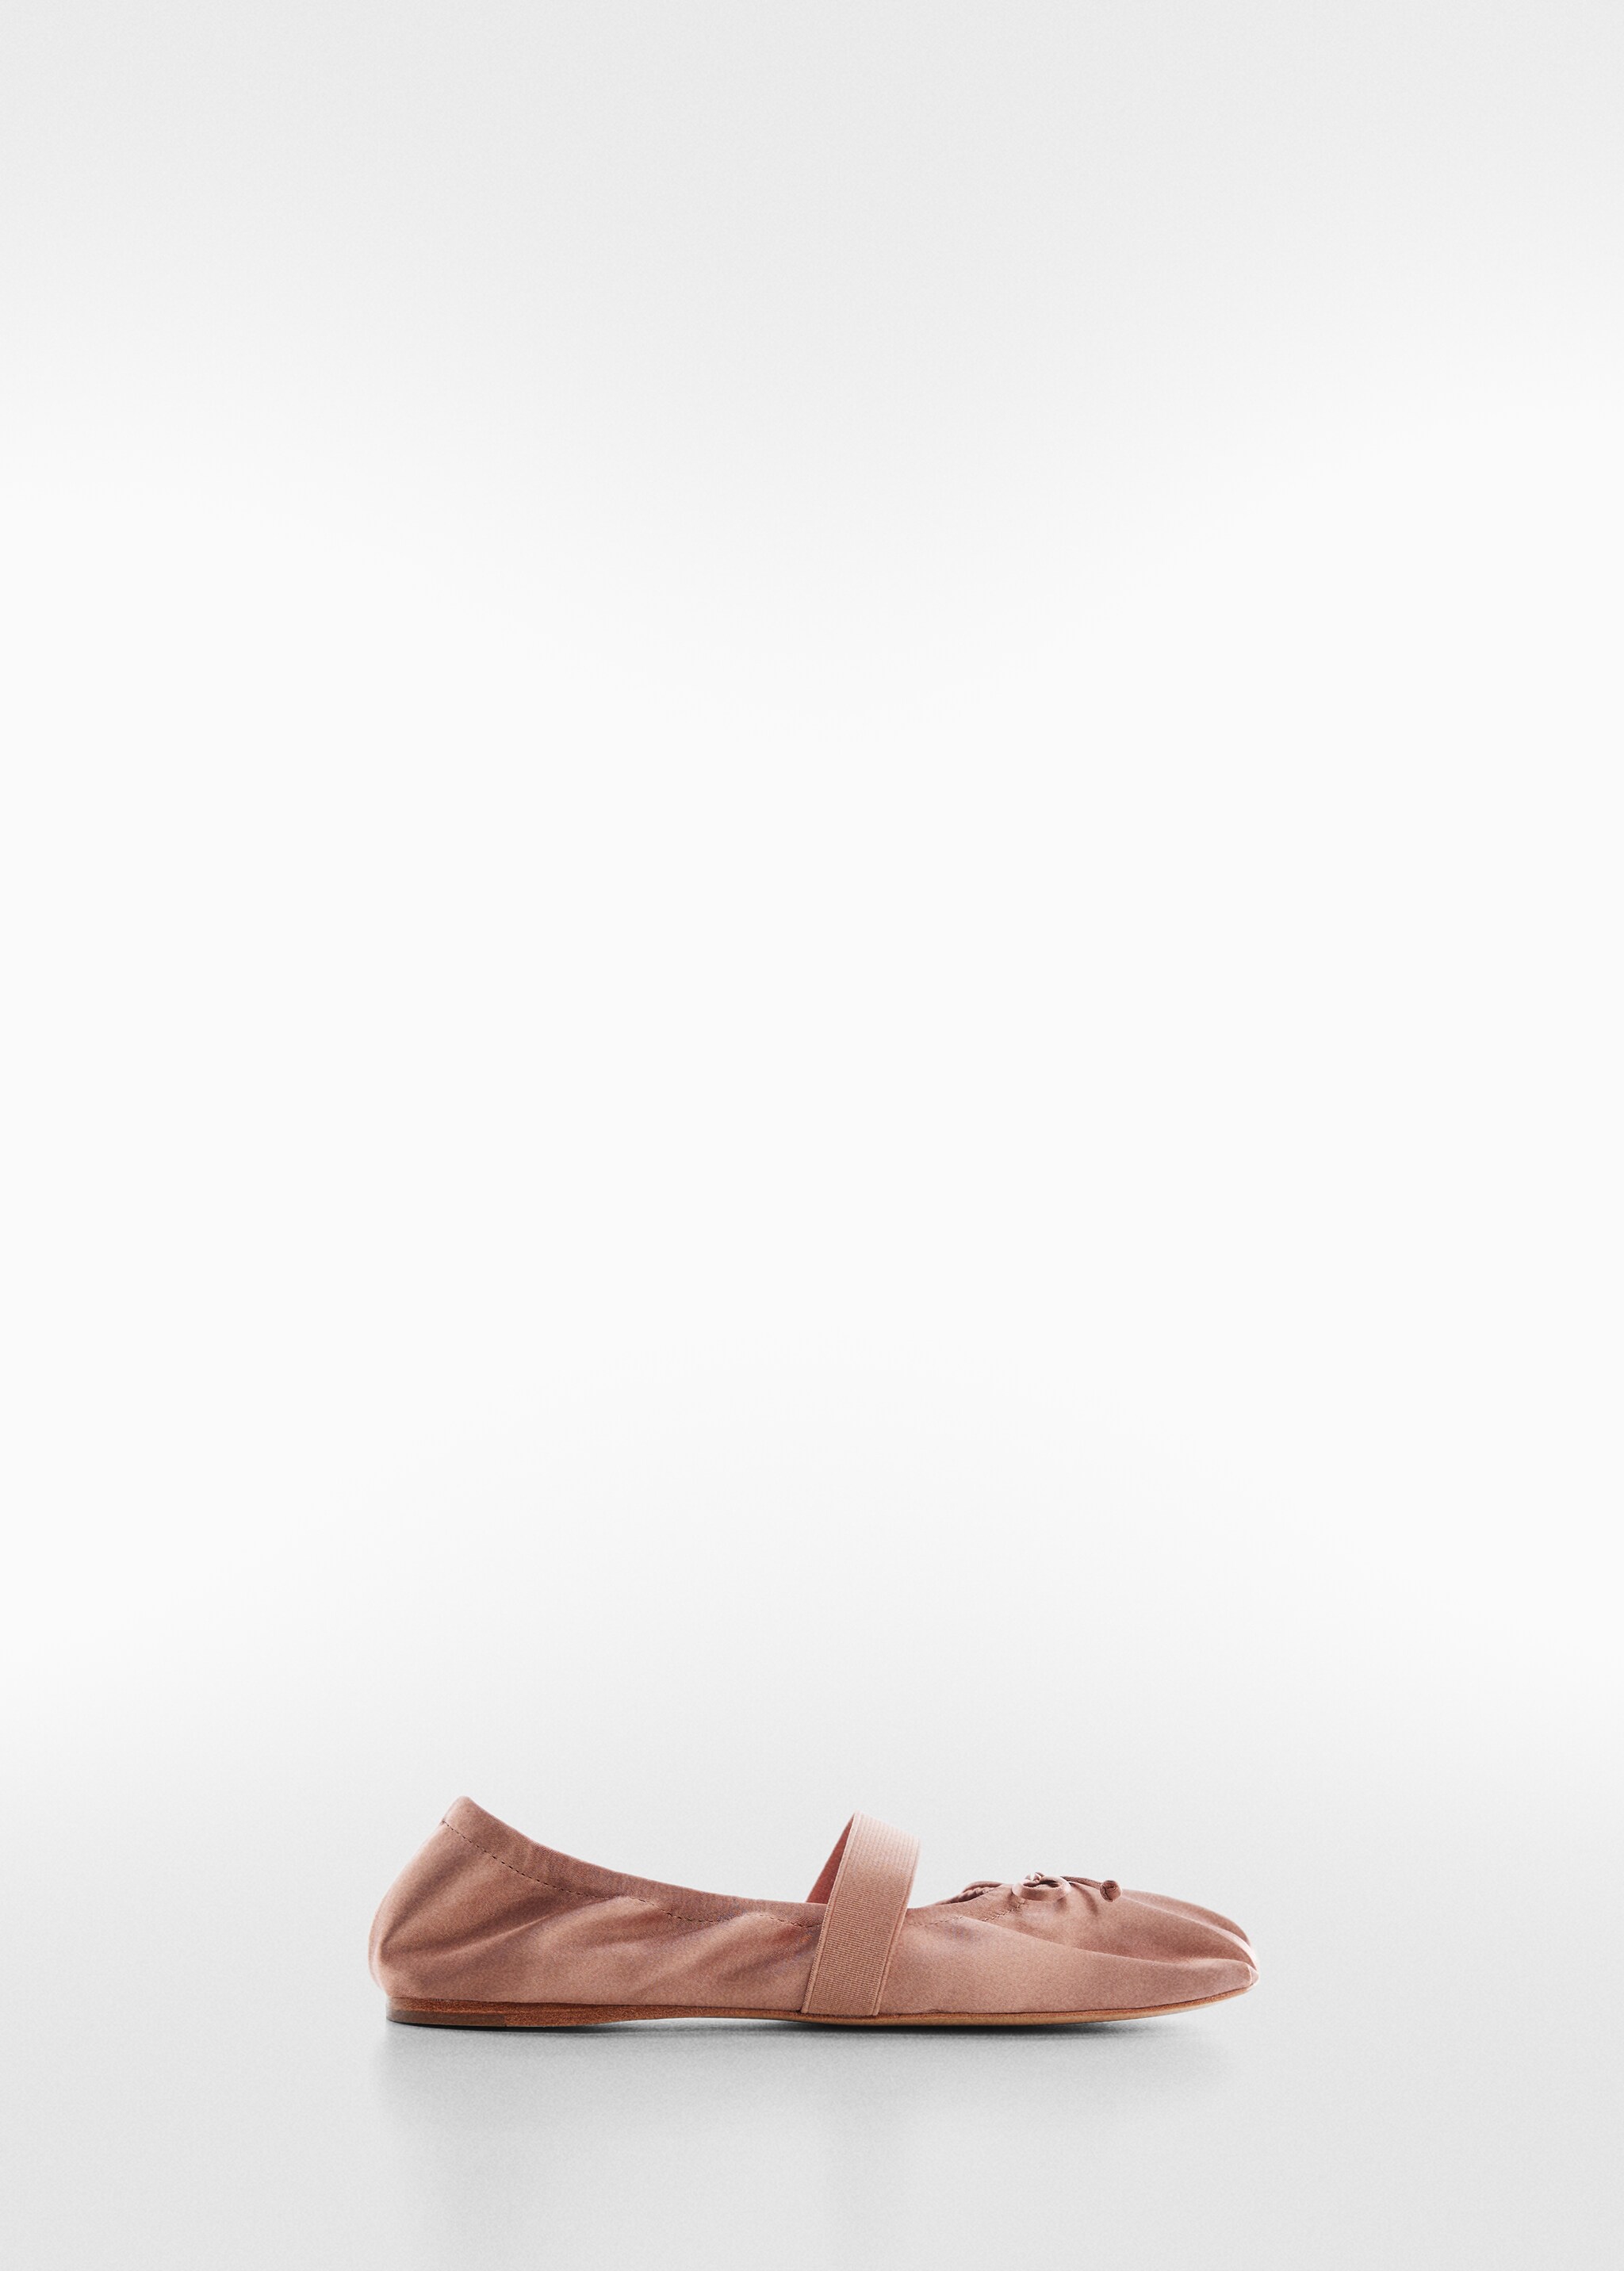 Elastic satin ballerinas - Article without model